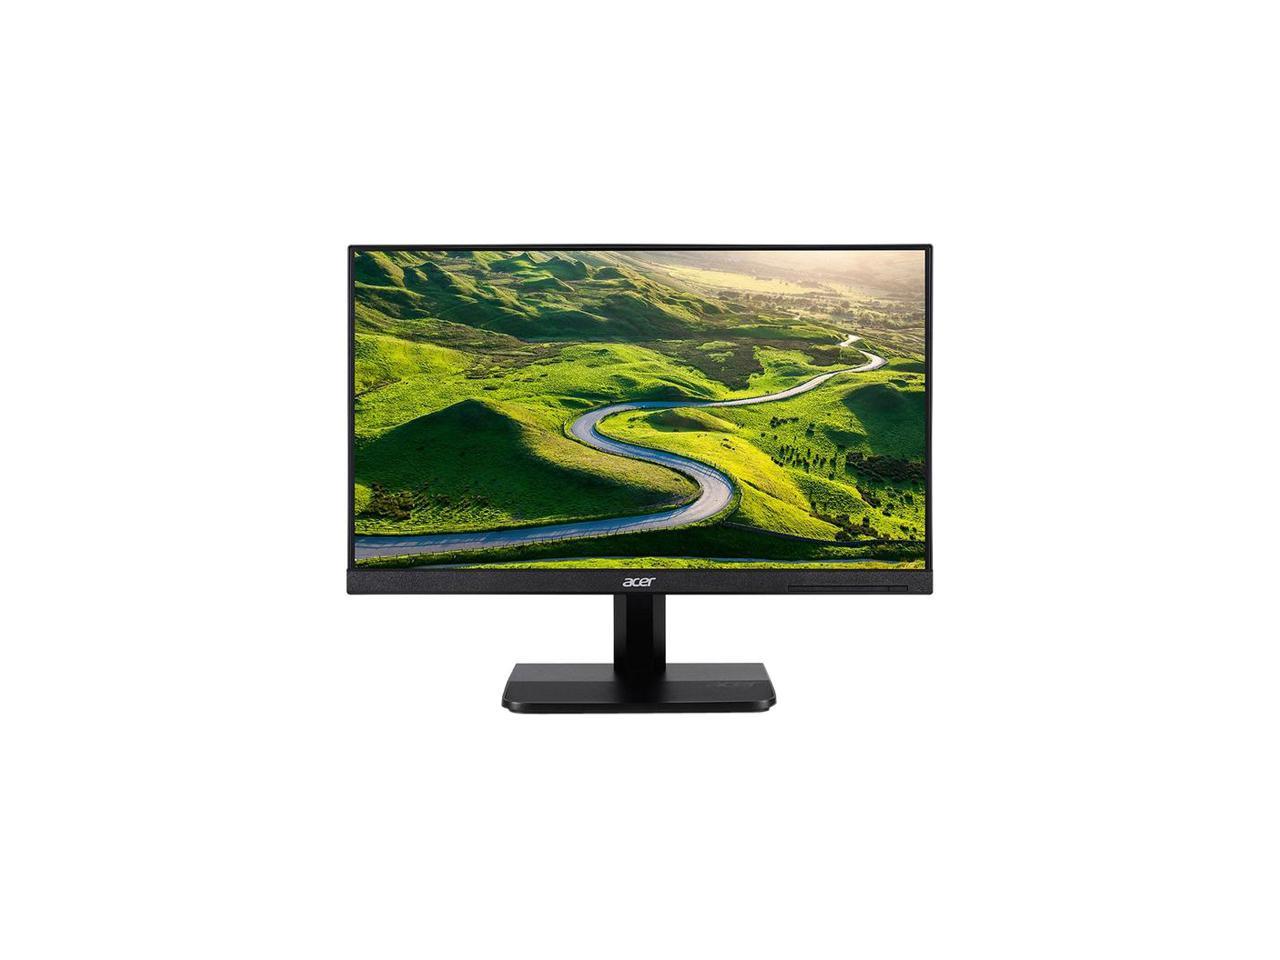 Acer VA241Y 24" (23.8" Viewable) Full HD LED LCD Monitor - 16:9 - Black - Vertical Alignment (VA) - 1920 x 1080 - 16.7 Million Colors - 250 Nit - 4 ms - 75 Hz Refresh Rate - HDMI - VGA - image 3 of 9